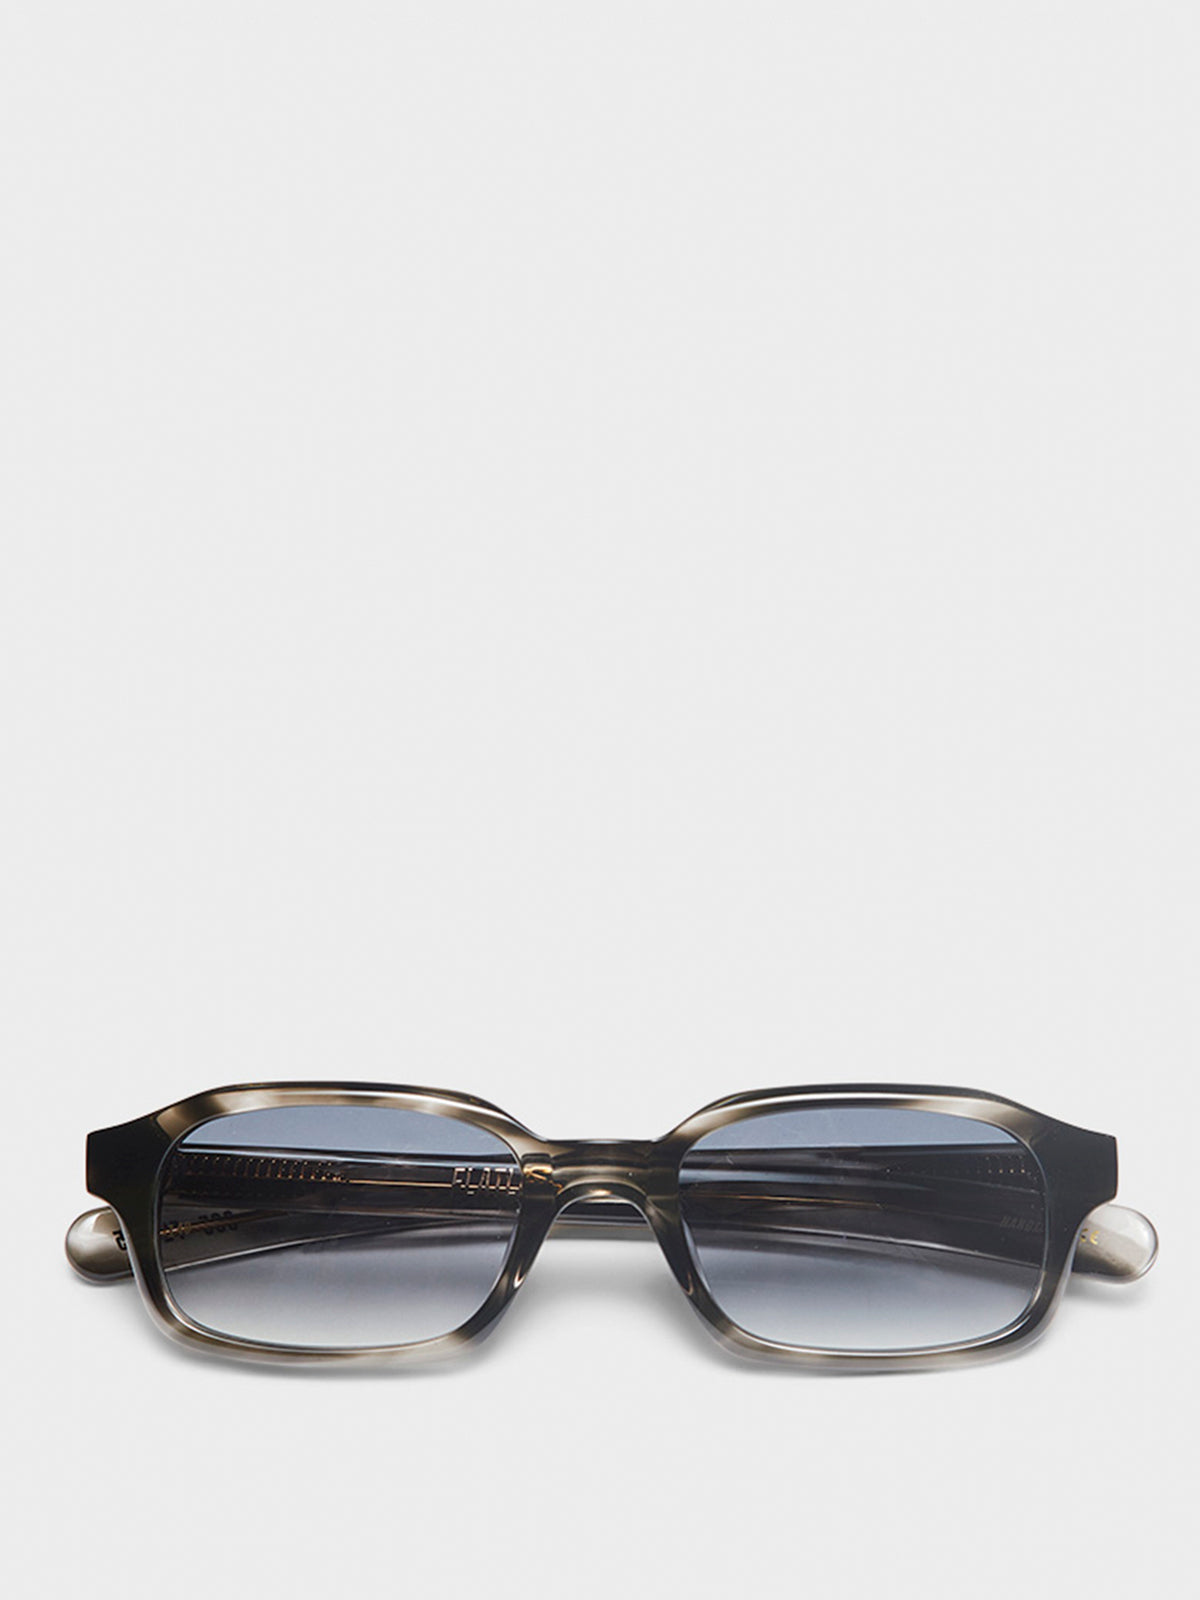 Flatlist - Hanky Sunglasses in Grey with a Blue Lens